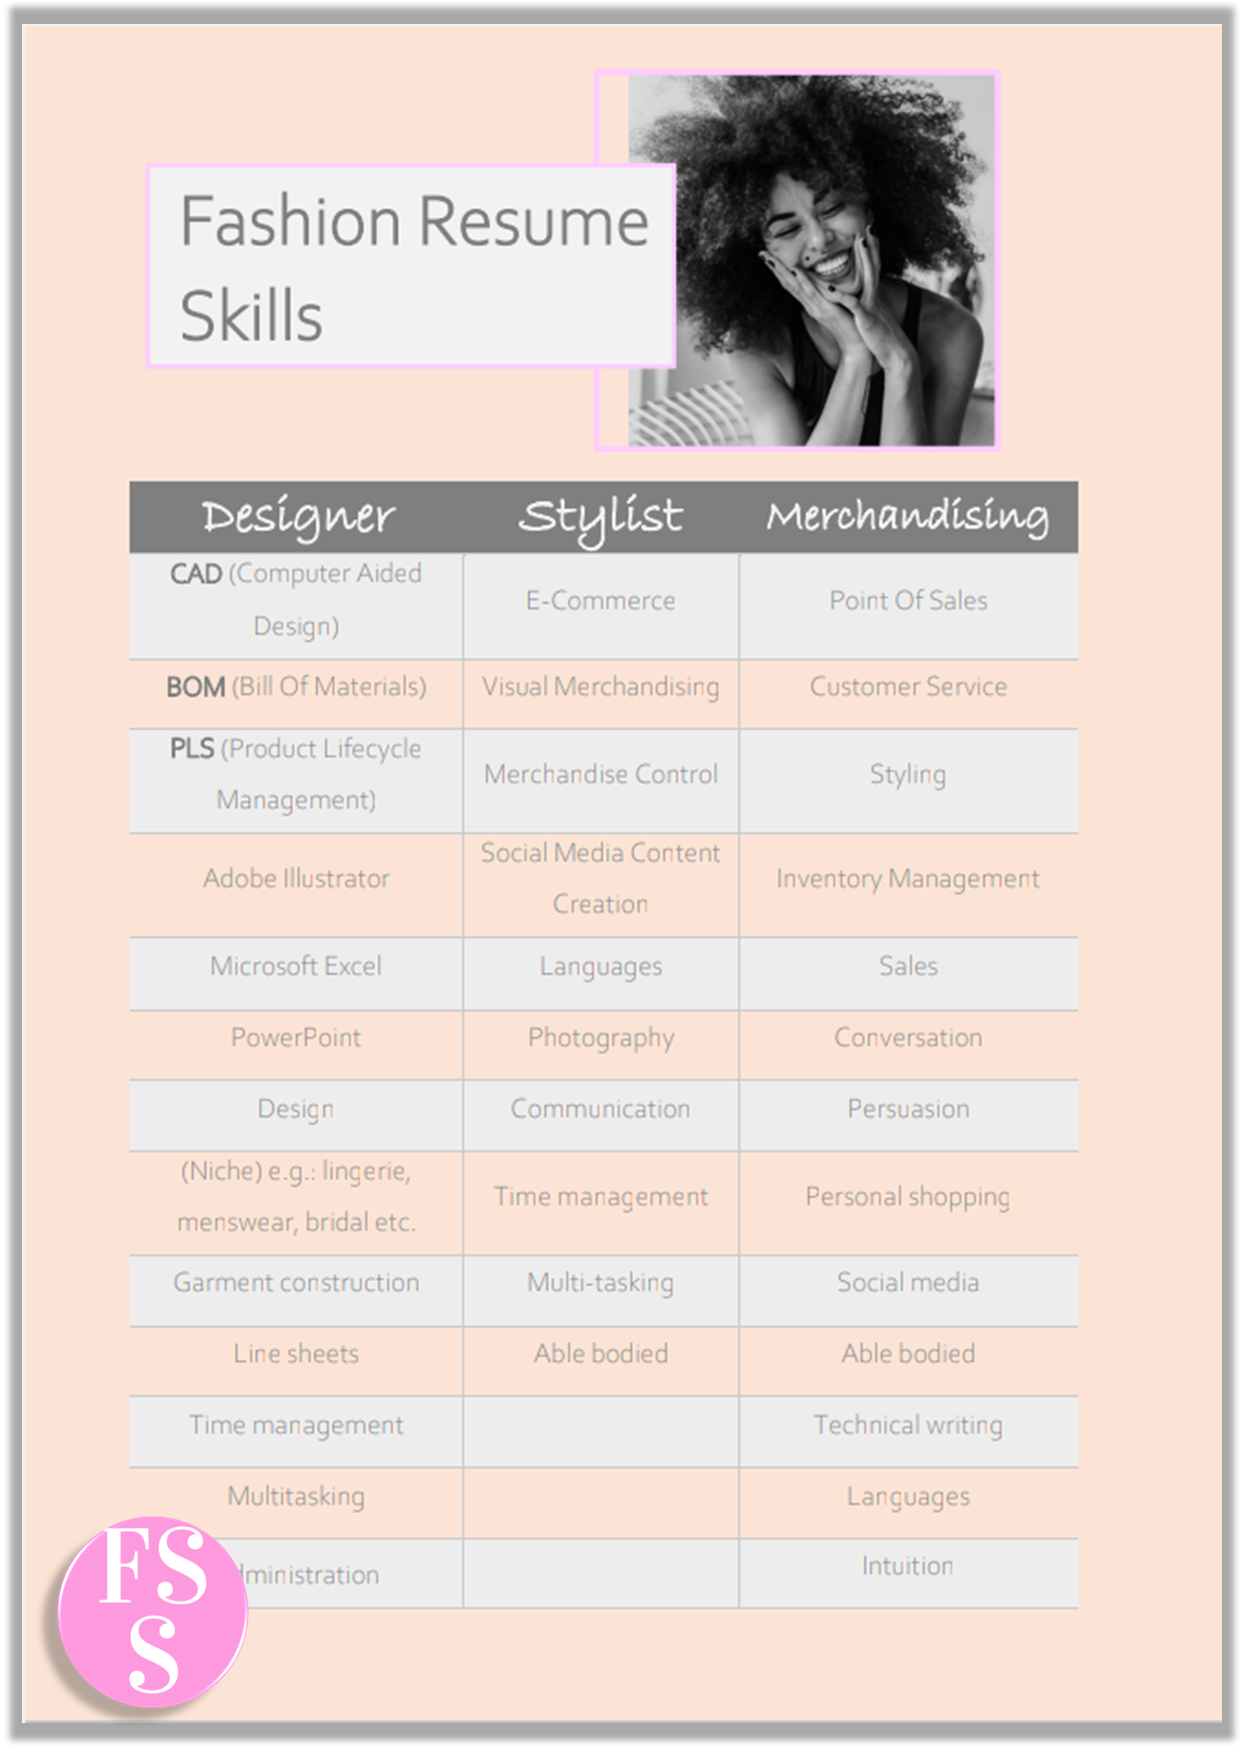 A list of fashion cv skills to use in your next job application. Perfect for fashion design, stylist & merchandising resumes.